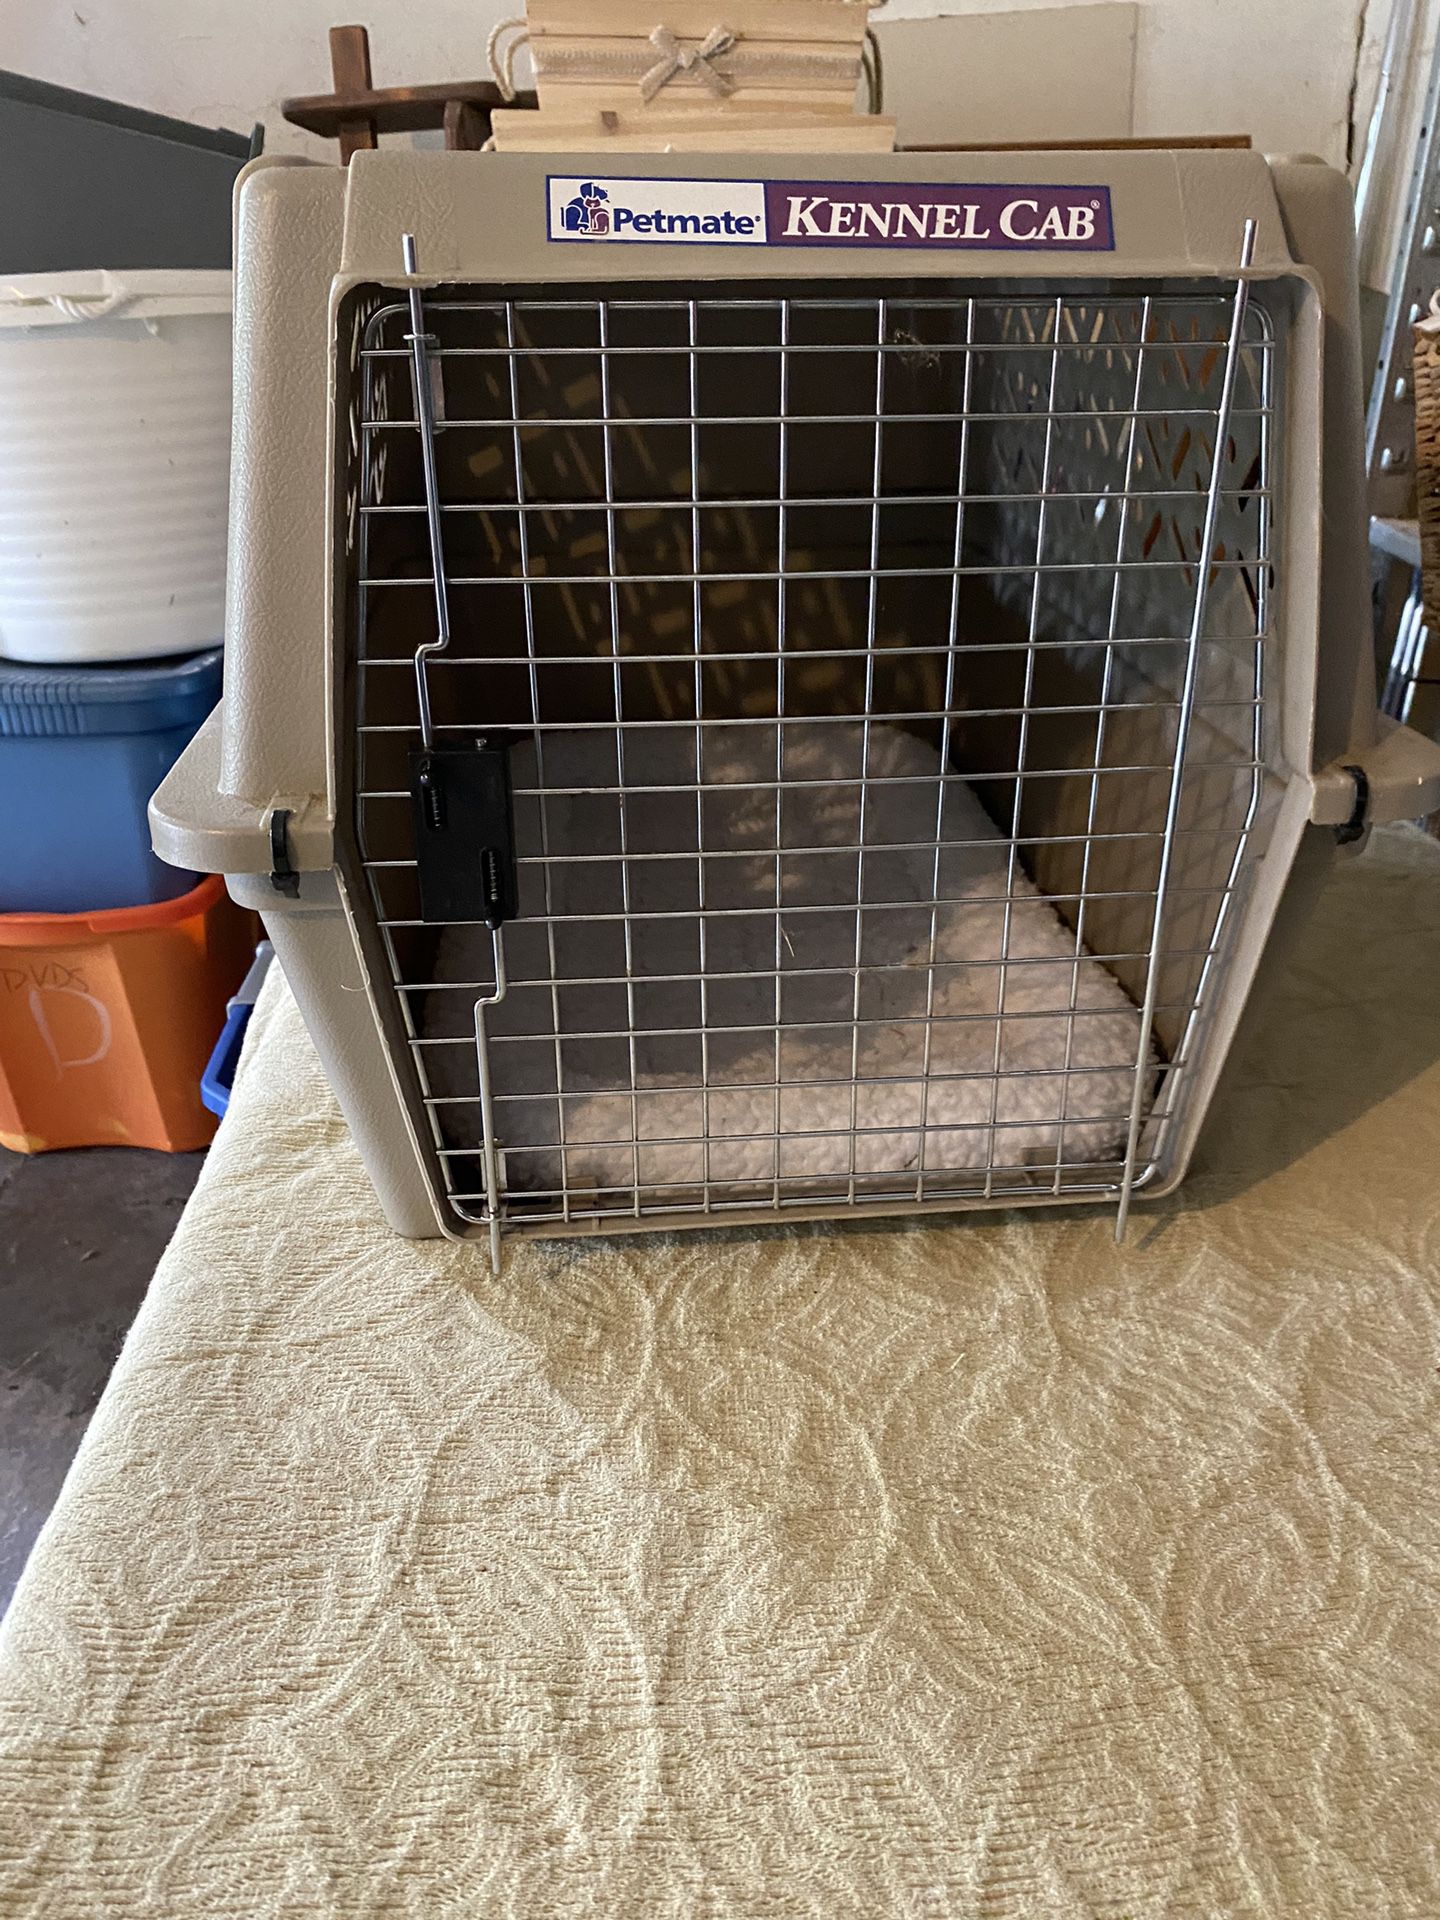 Dog Carrier With Padded Bed